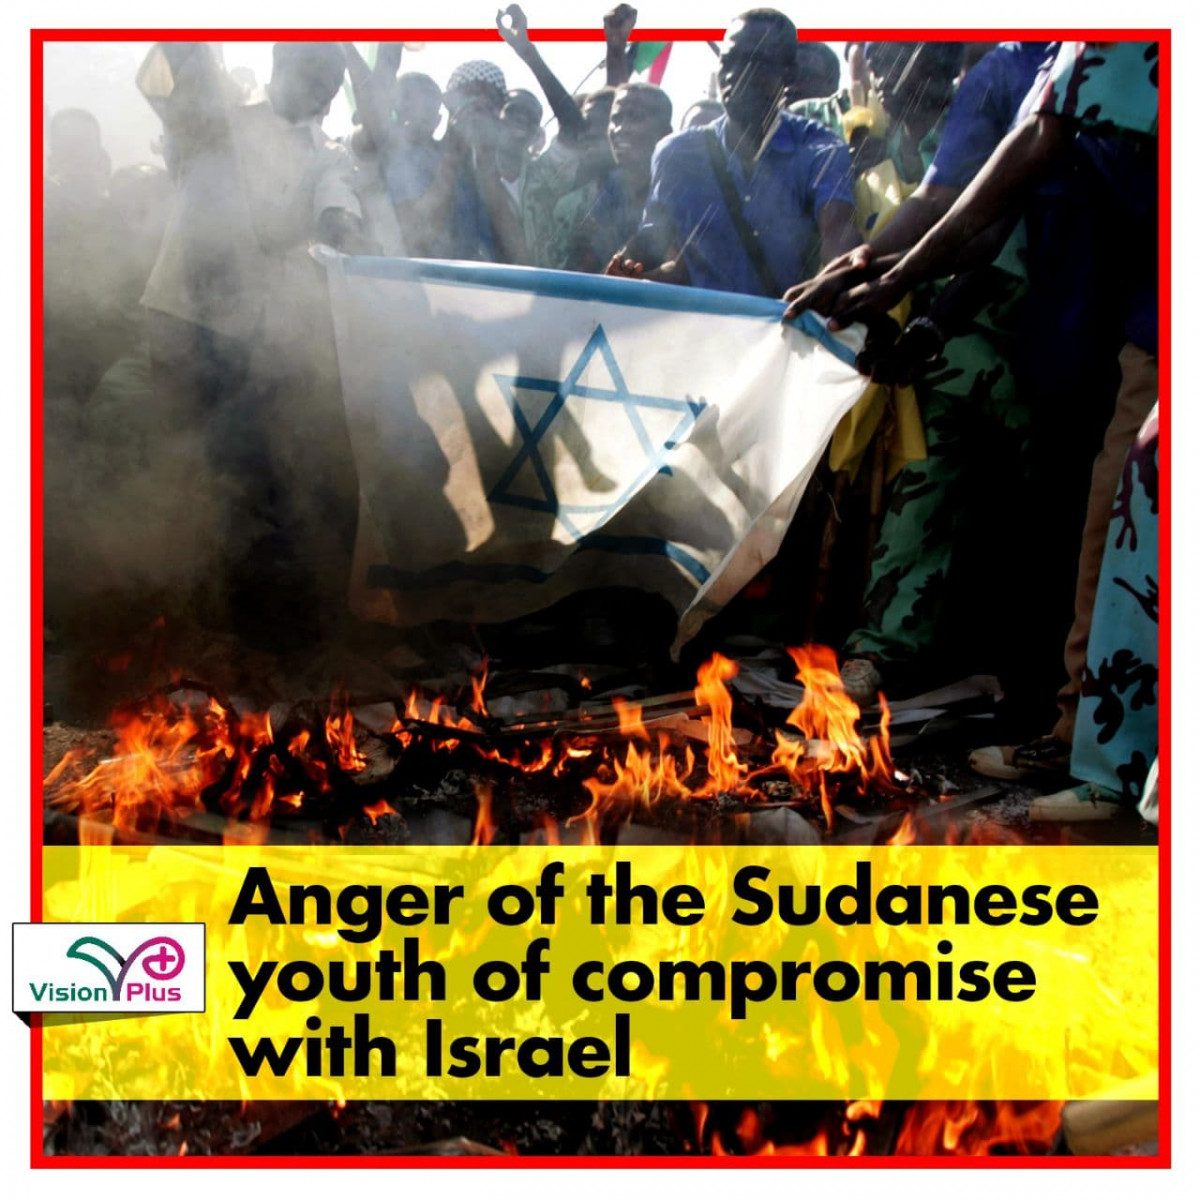 Anger of the Sudanese youth of compromise with Israel